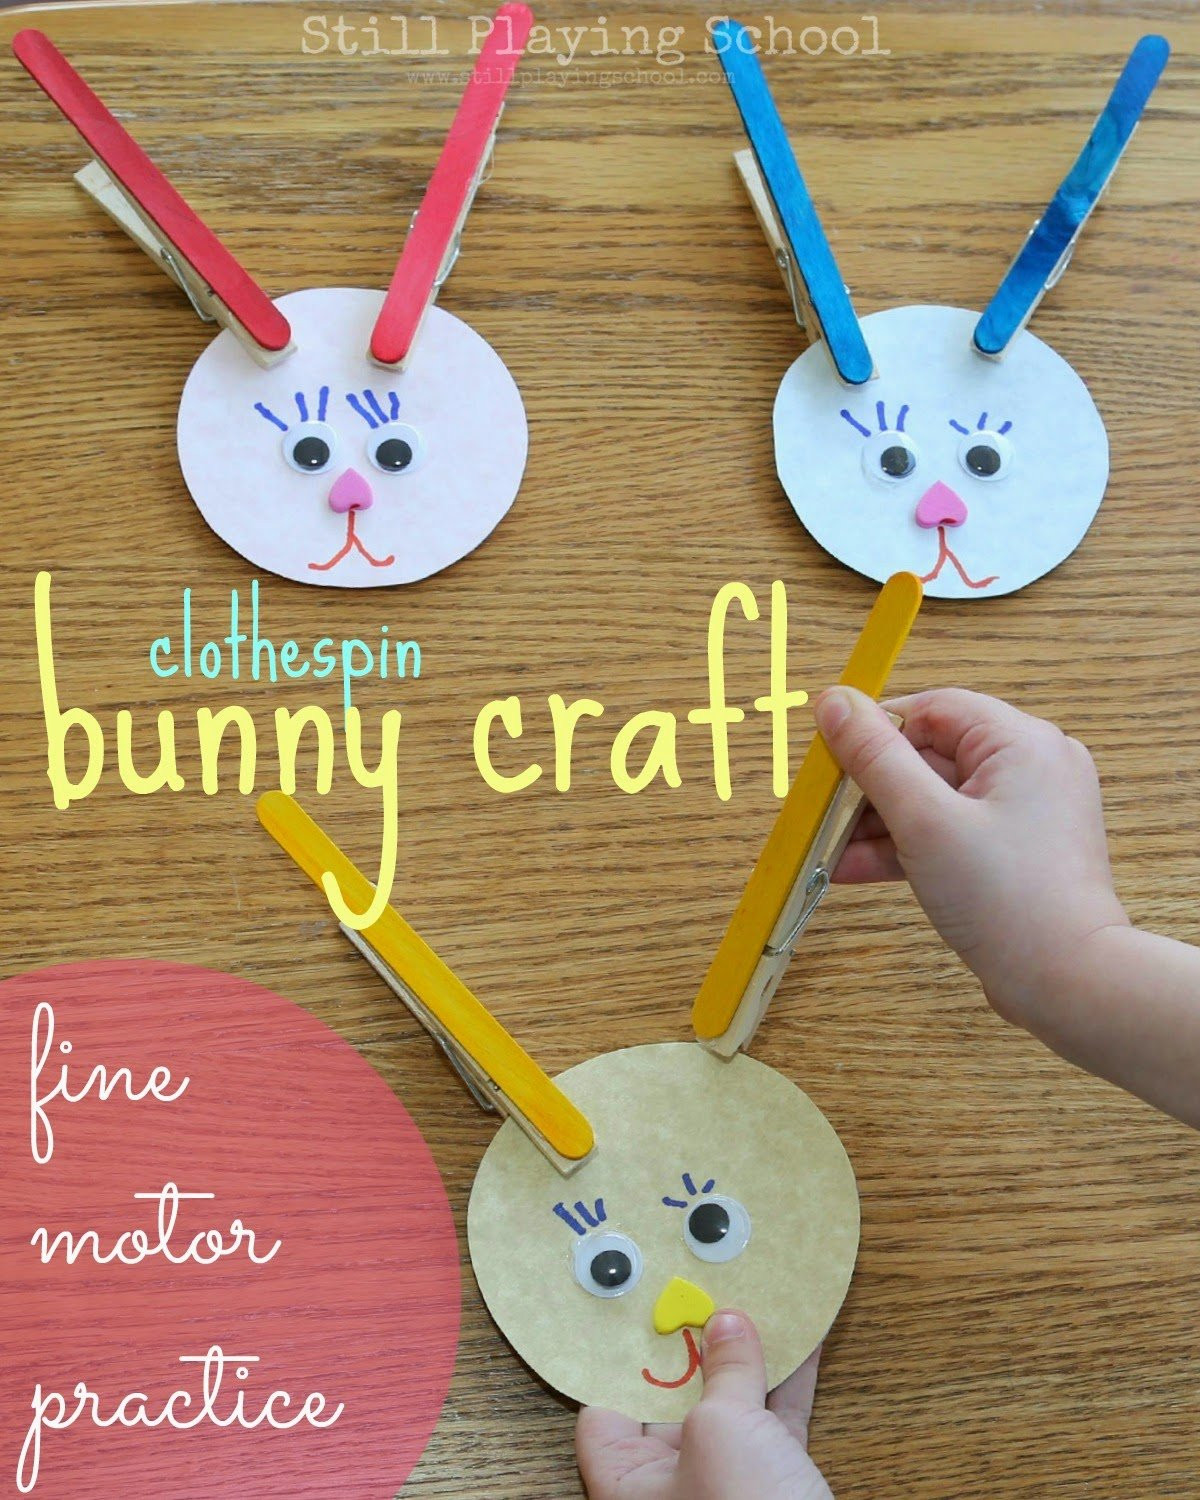 Simple Craft For Preschoolers
 11 Easy Craft Ideas For Kids That Are Perfect for Parties